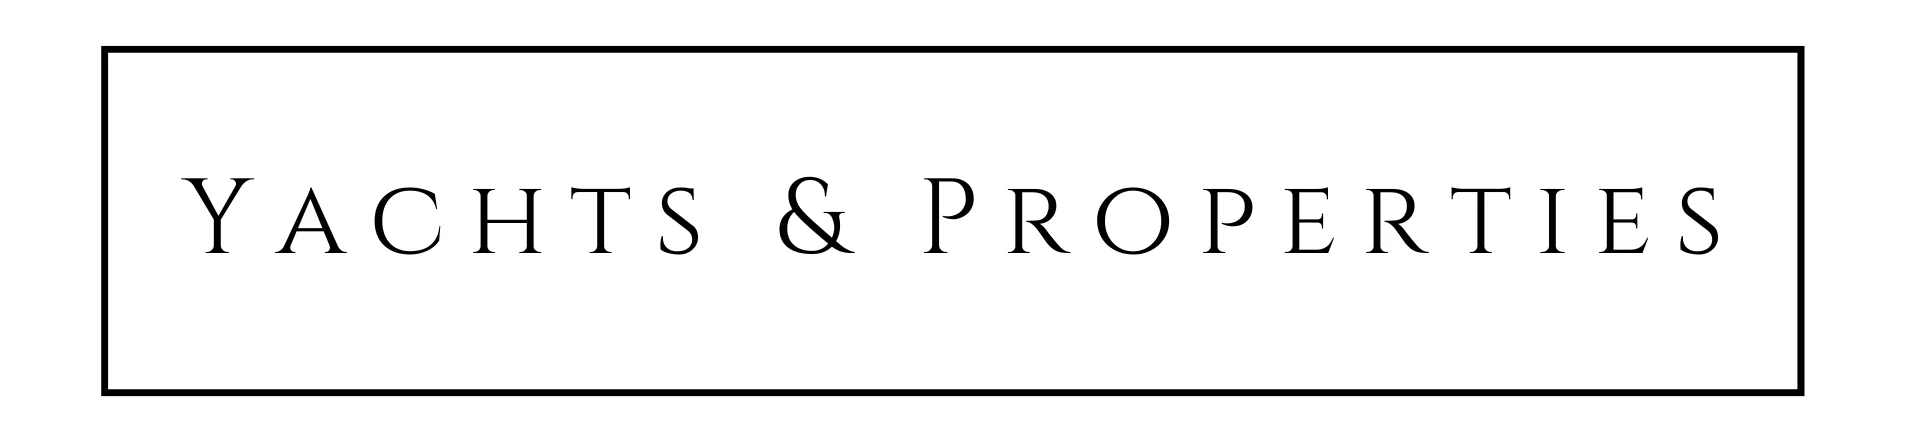 Yachts and Properties Logo